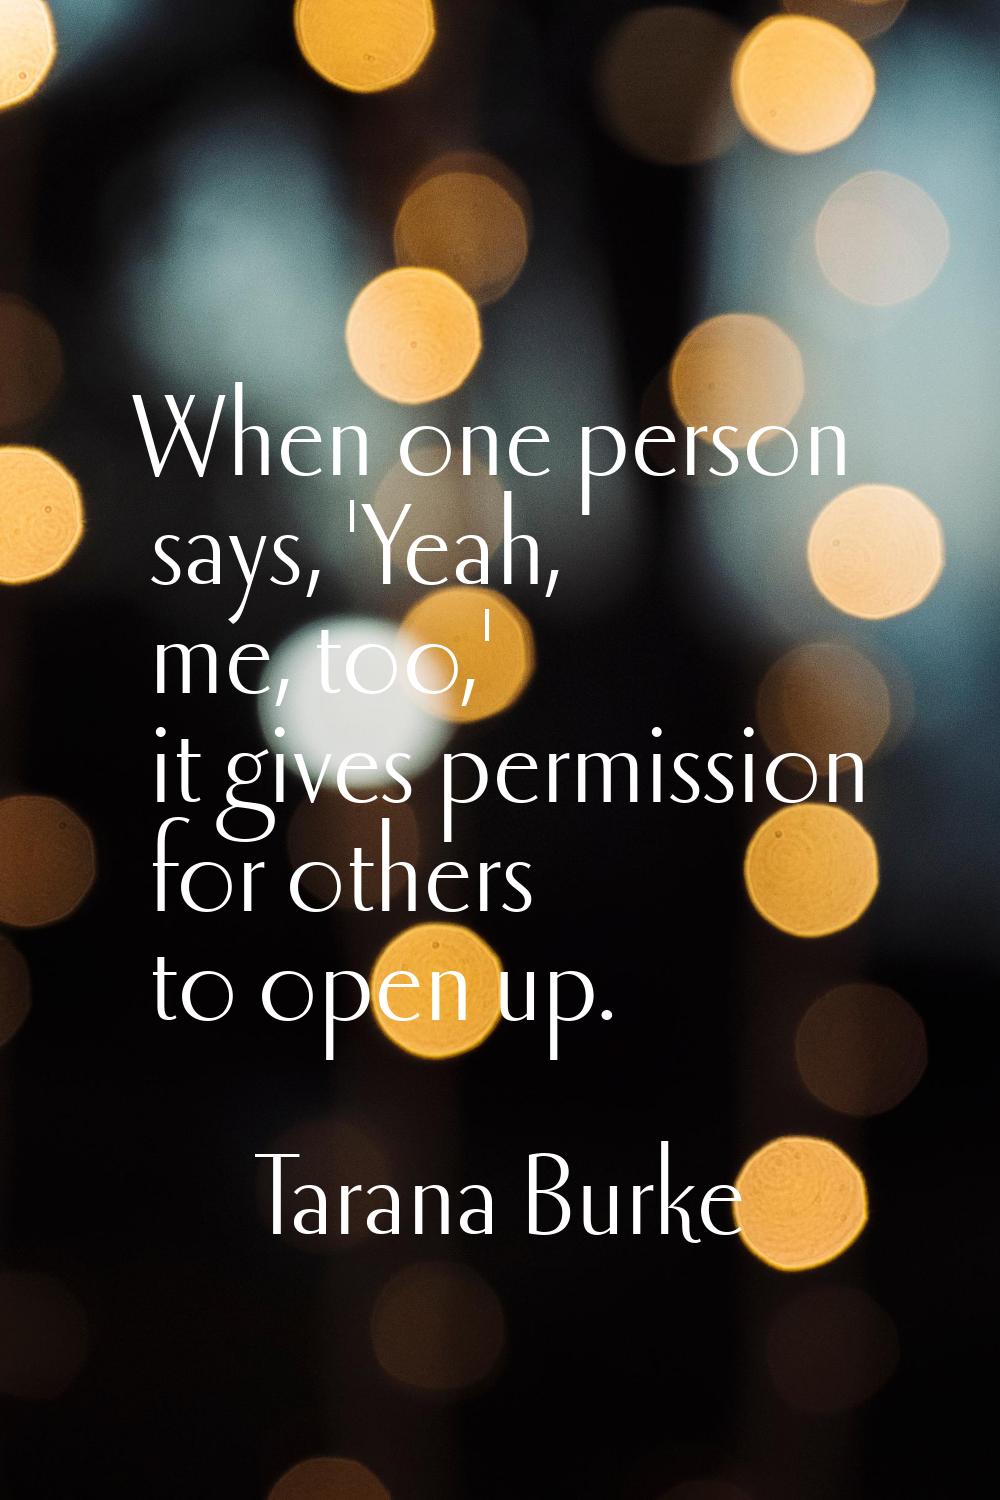 When one person says, 'Yeah, me, too,' it gives permission for others to open up.